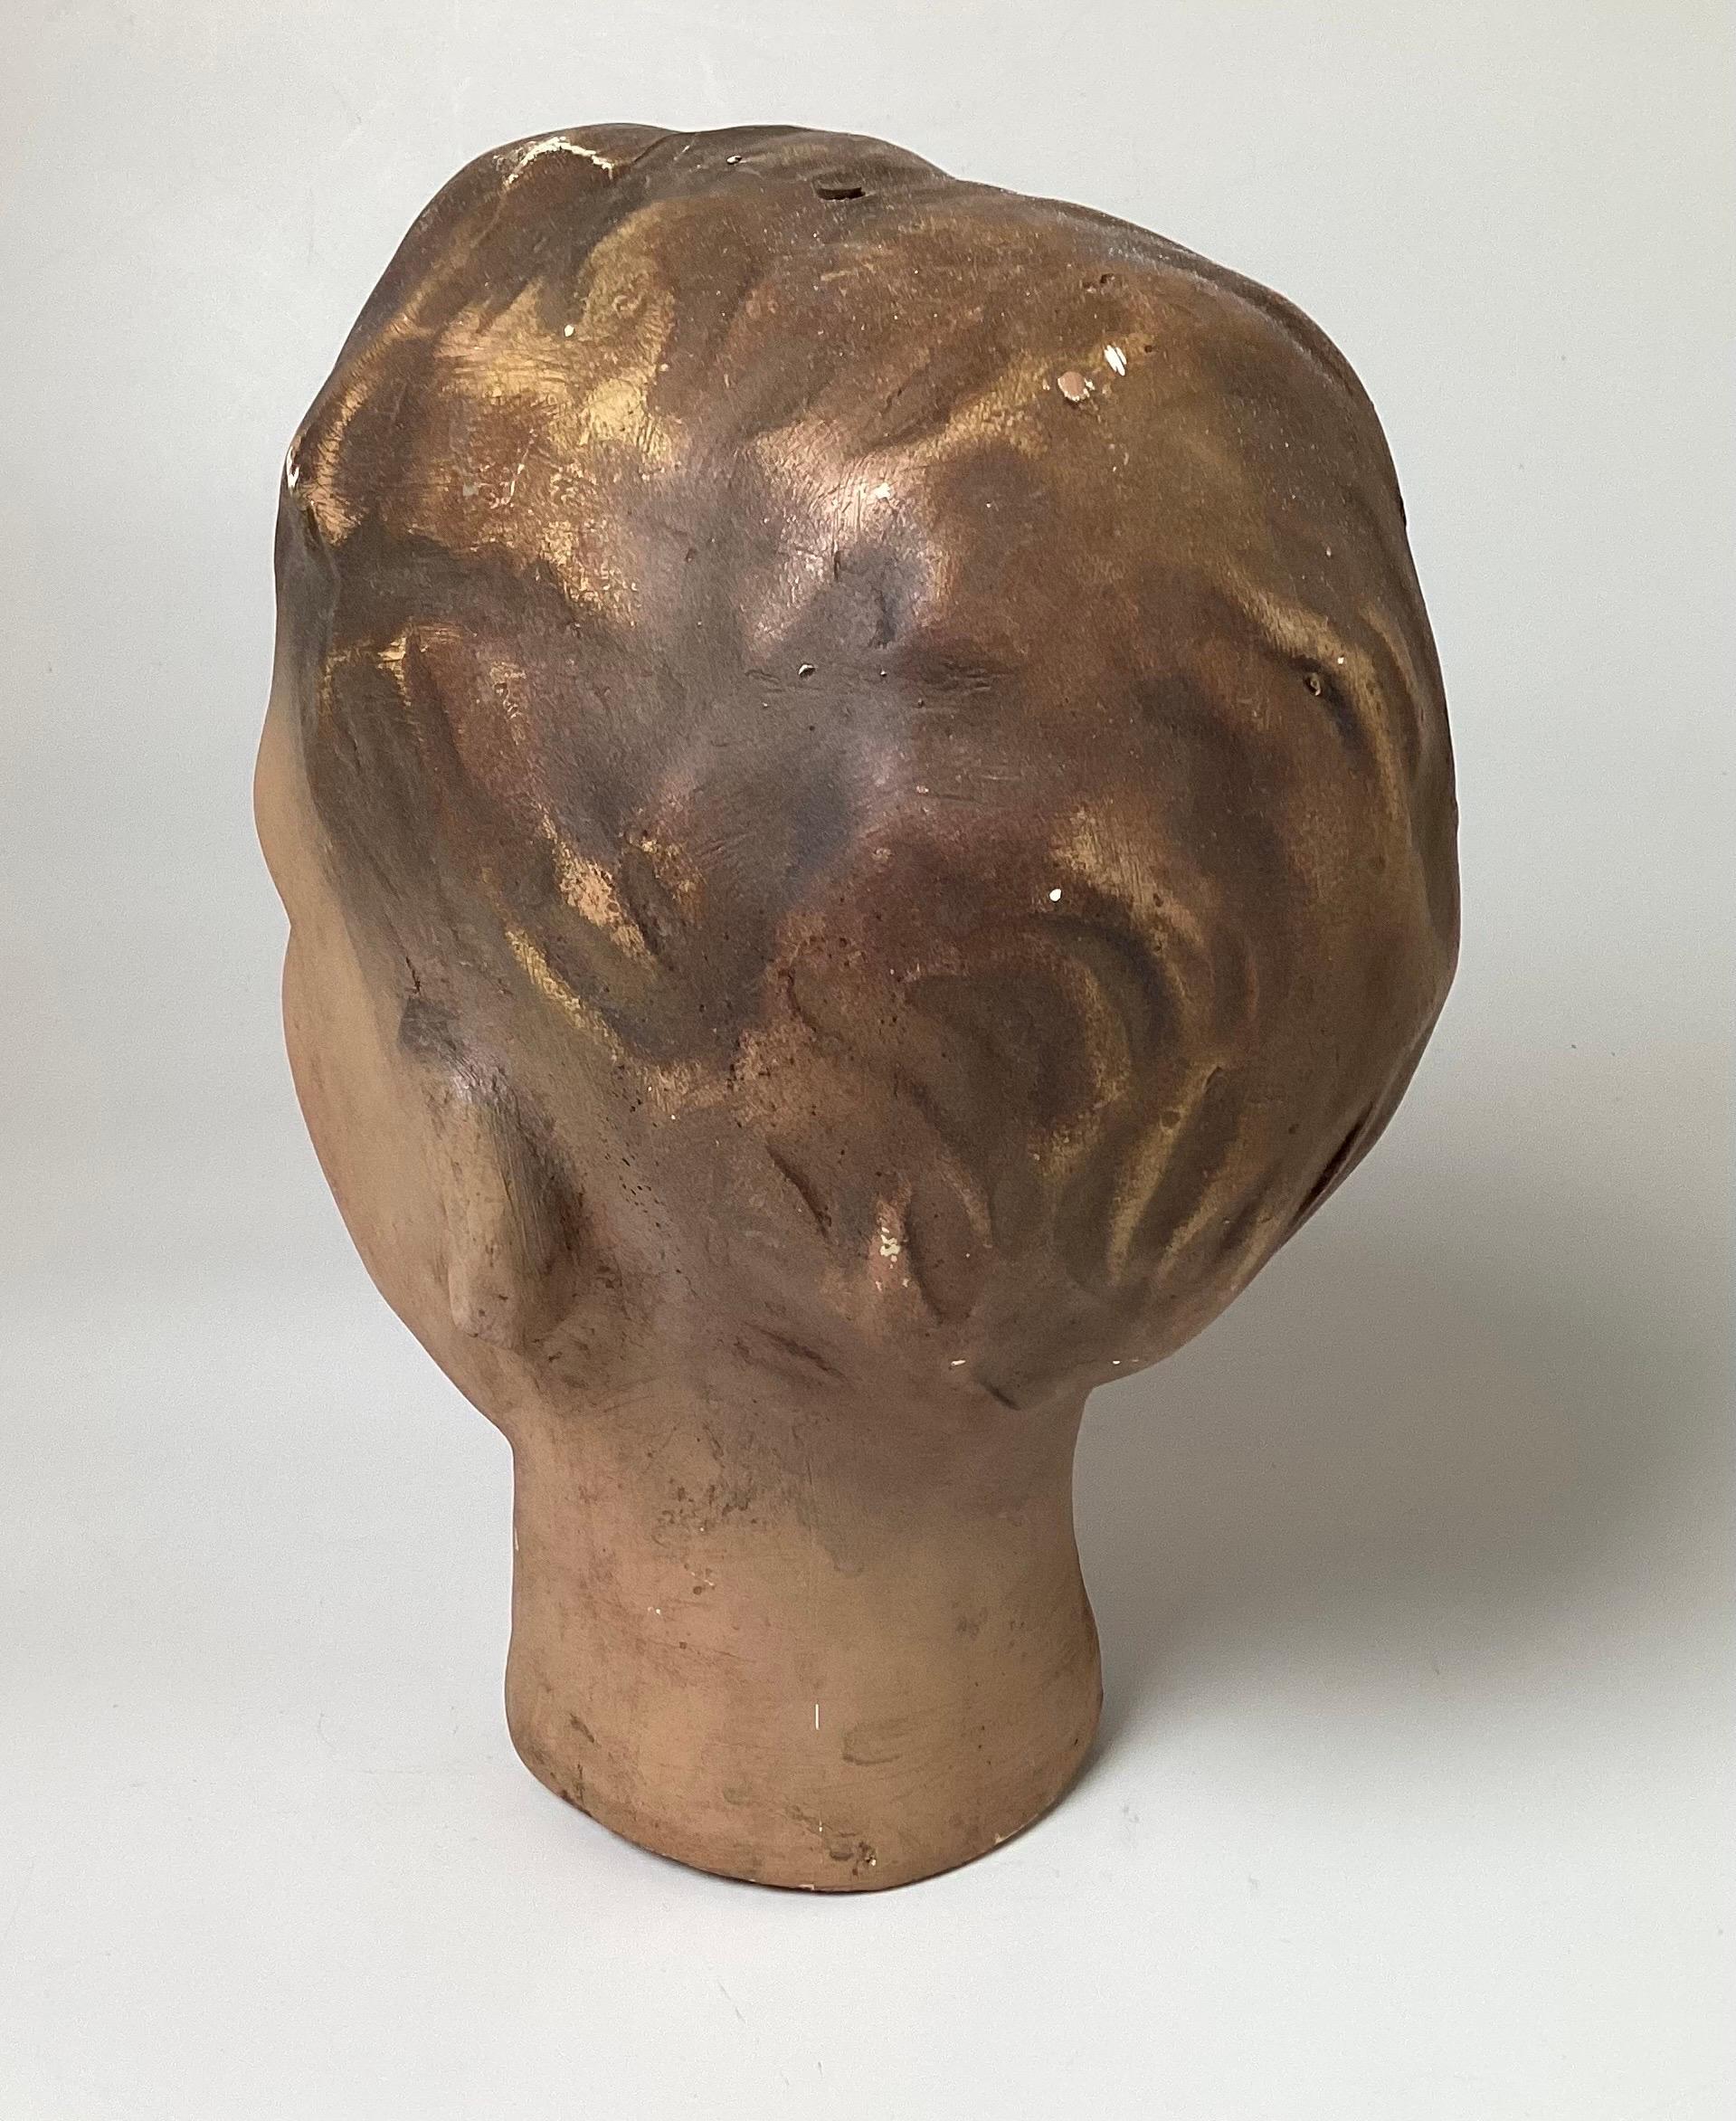 Painted European Young Male Mannequin Head, 1940s